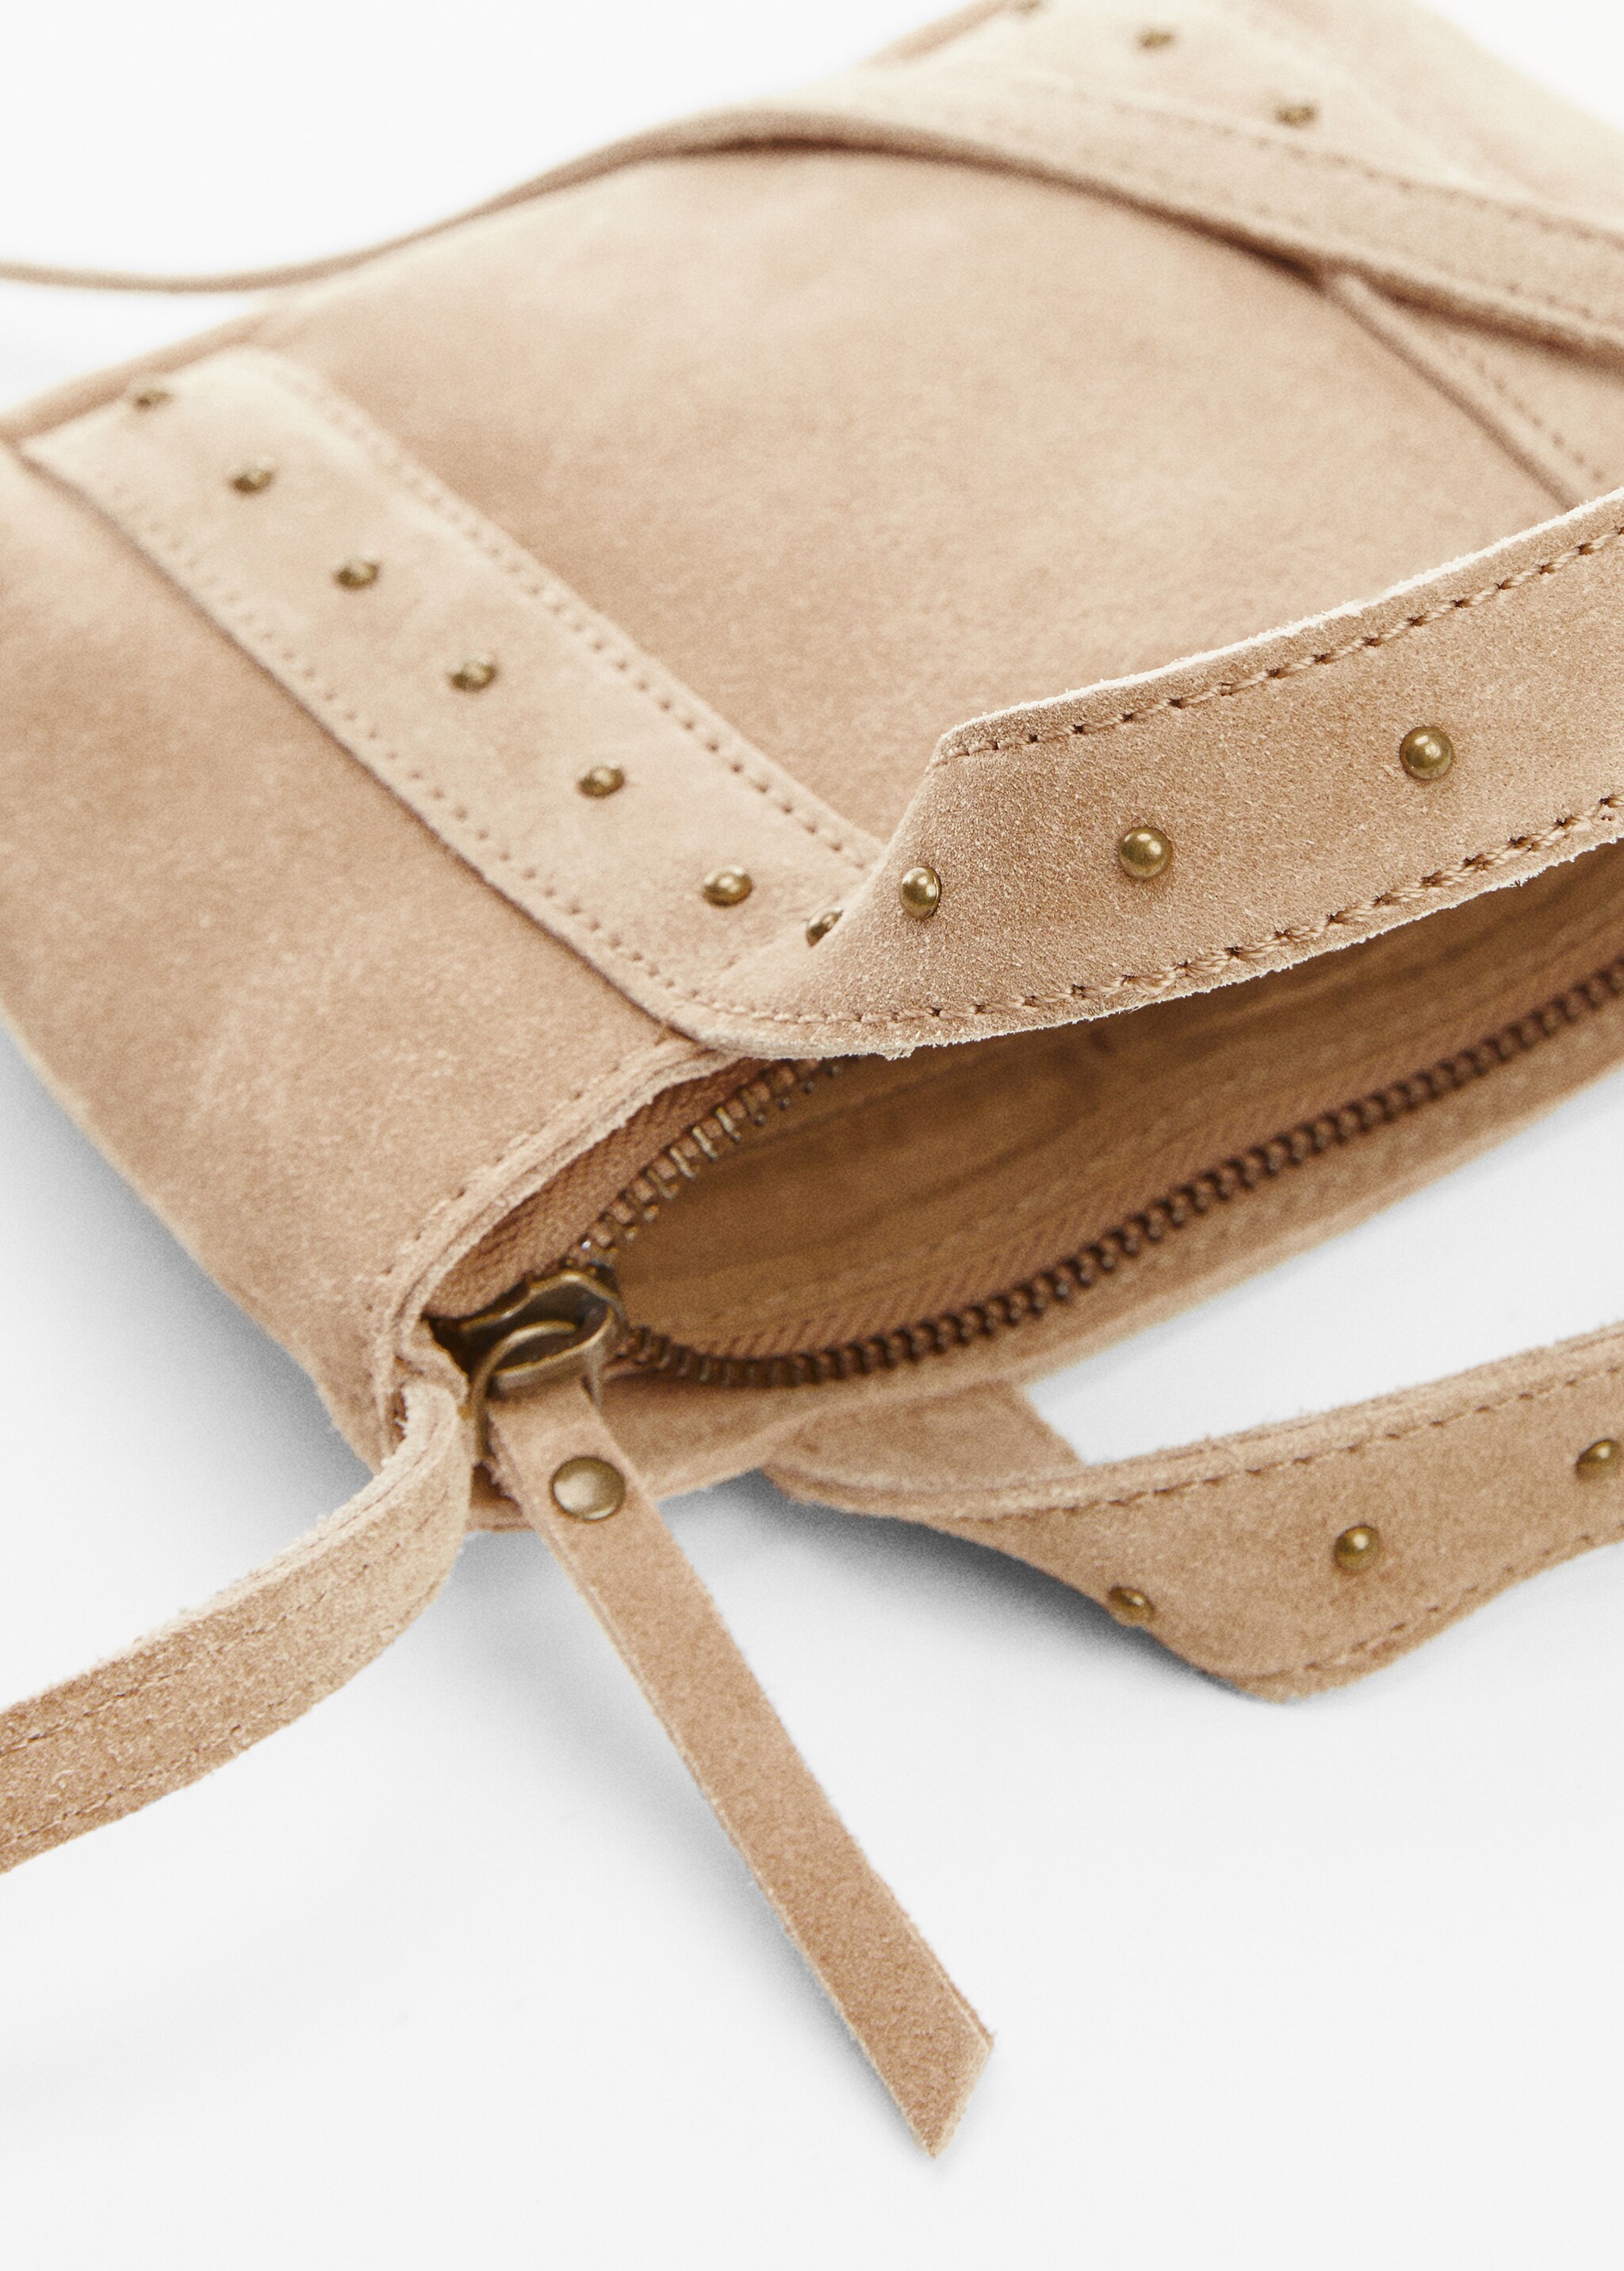 Leather mini shopper bag - Details of the article 2